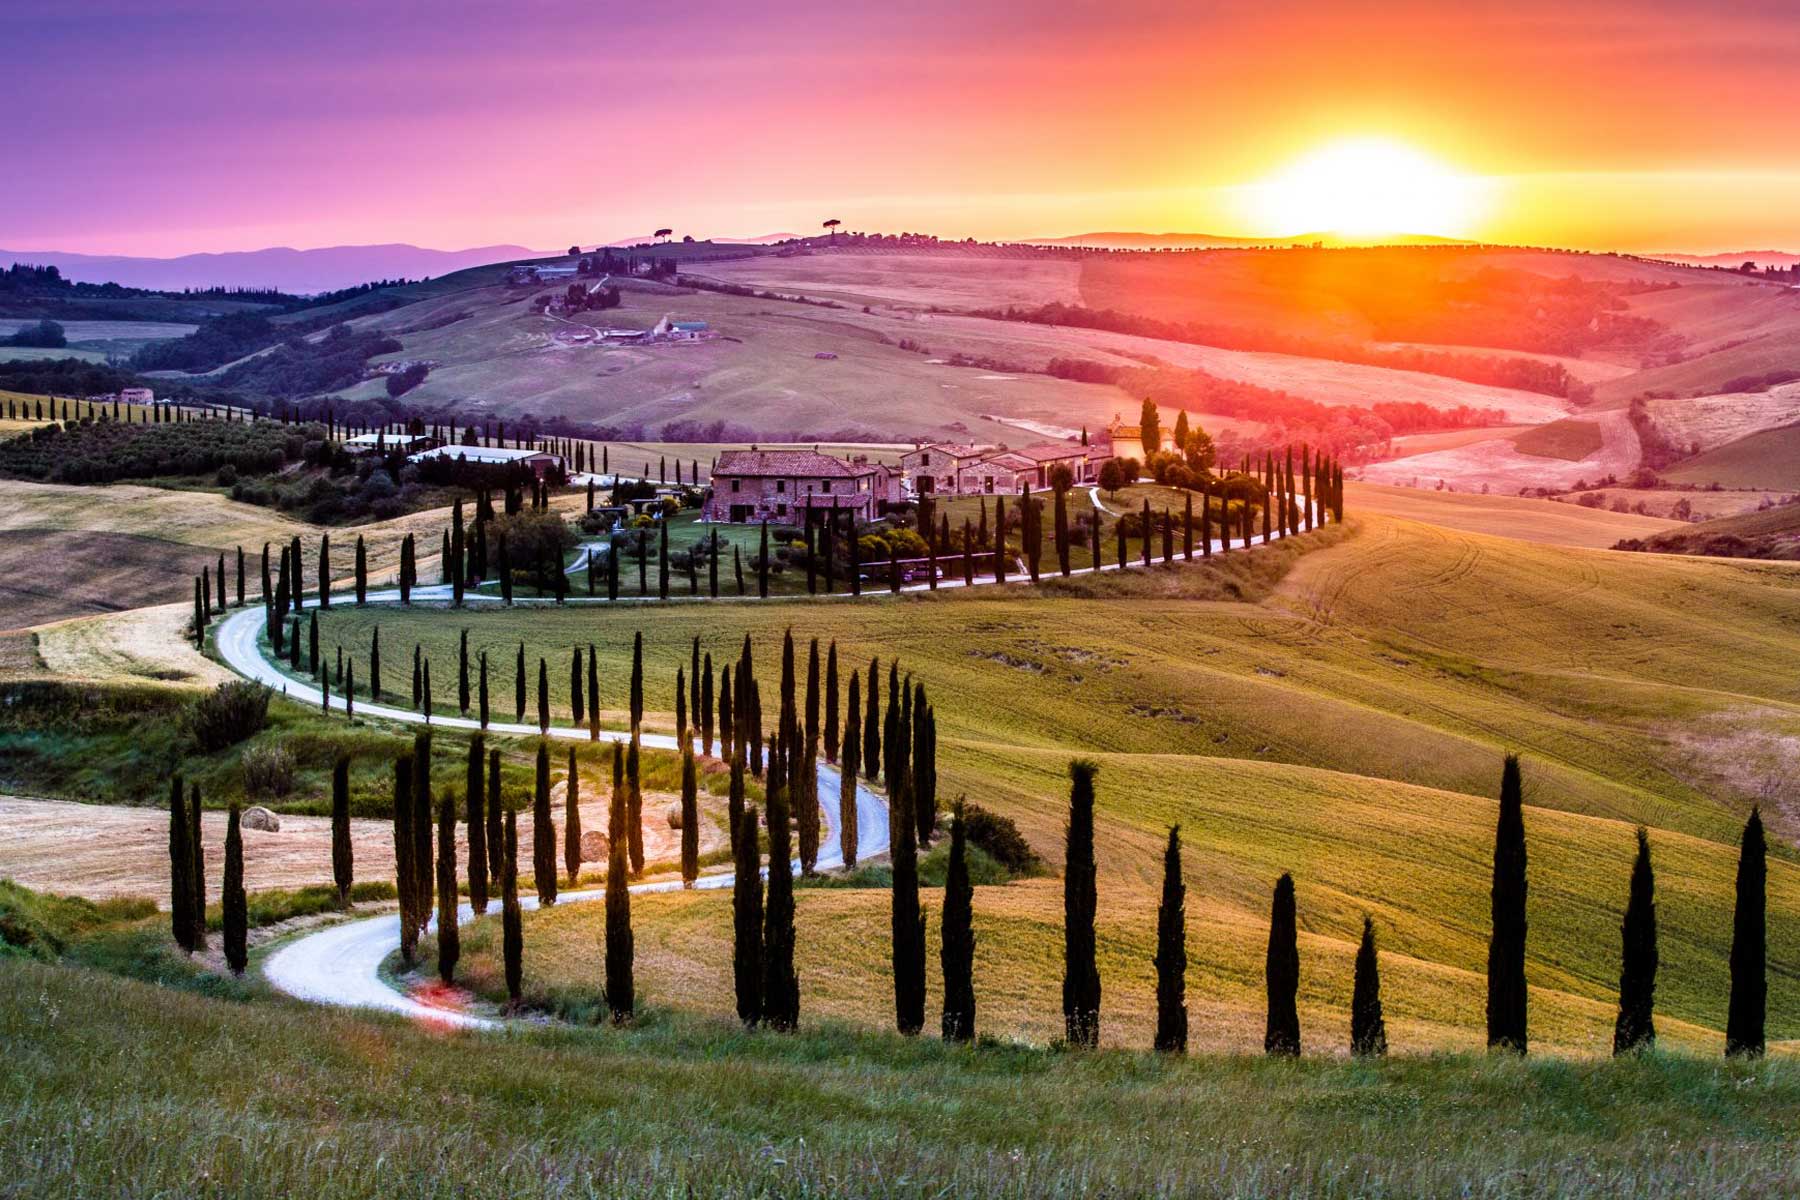 visit tuscany from rome